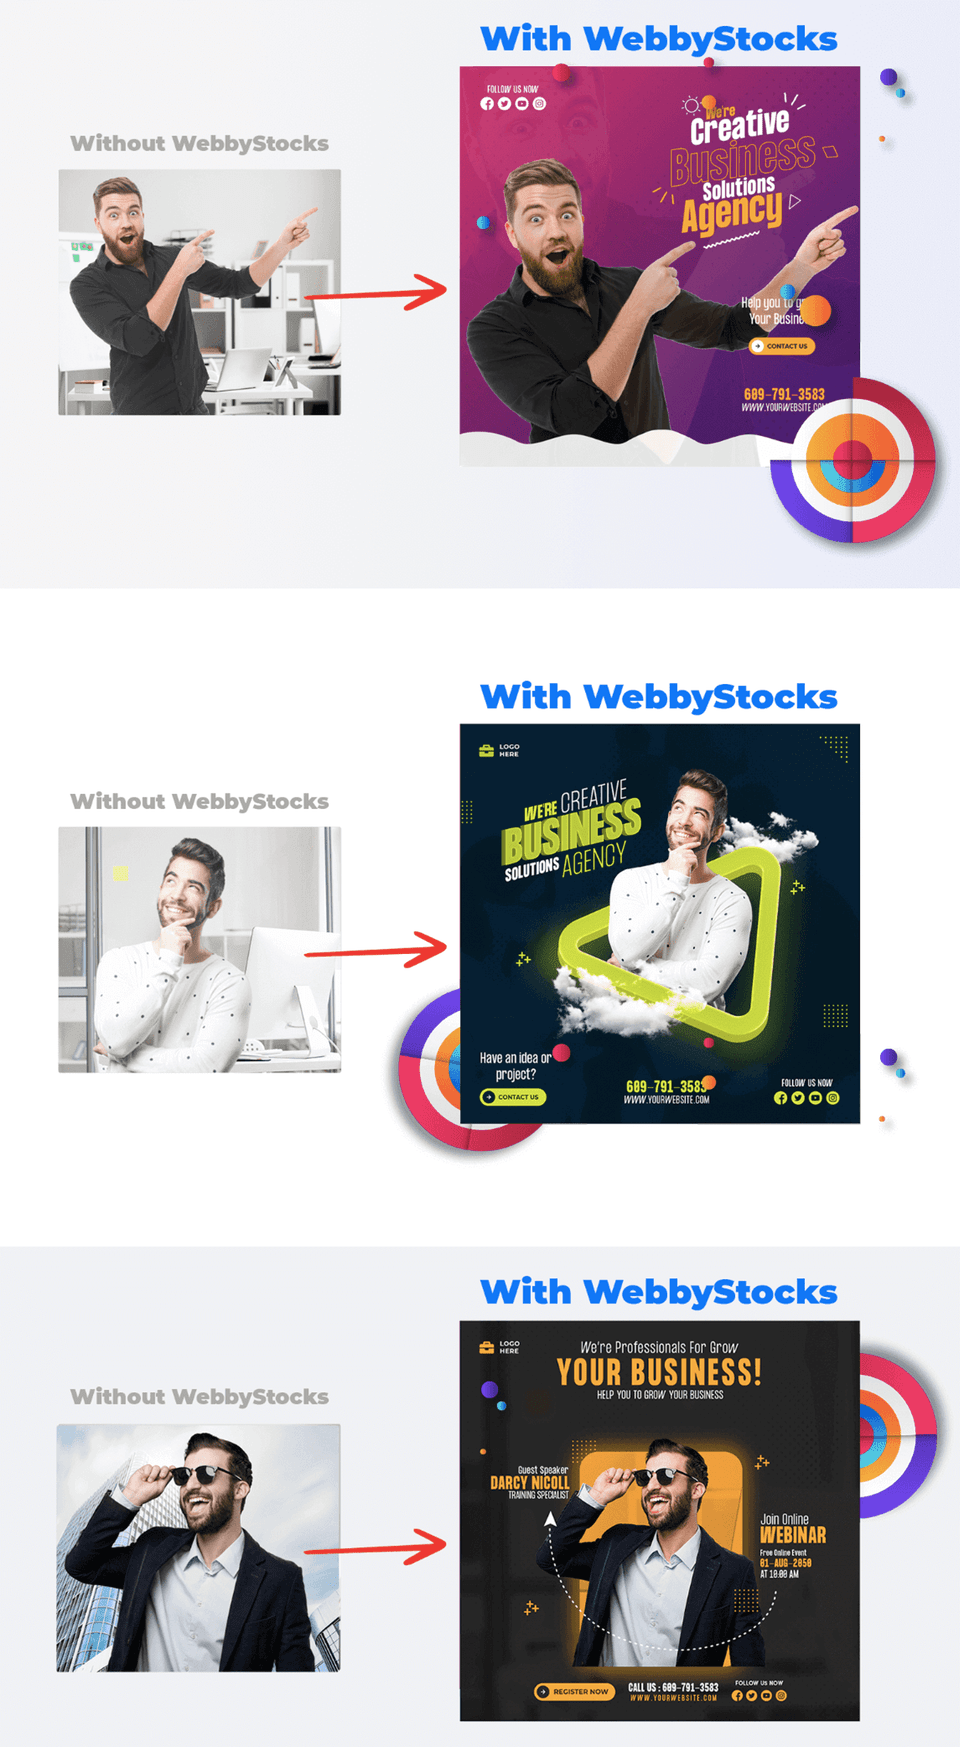 WebbyStocks-Before-After